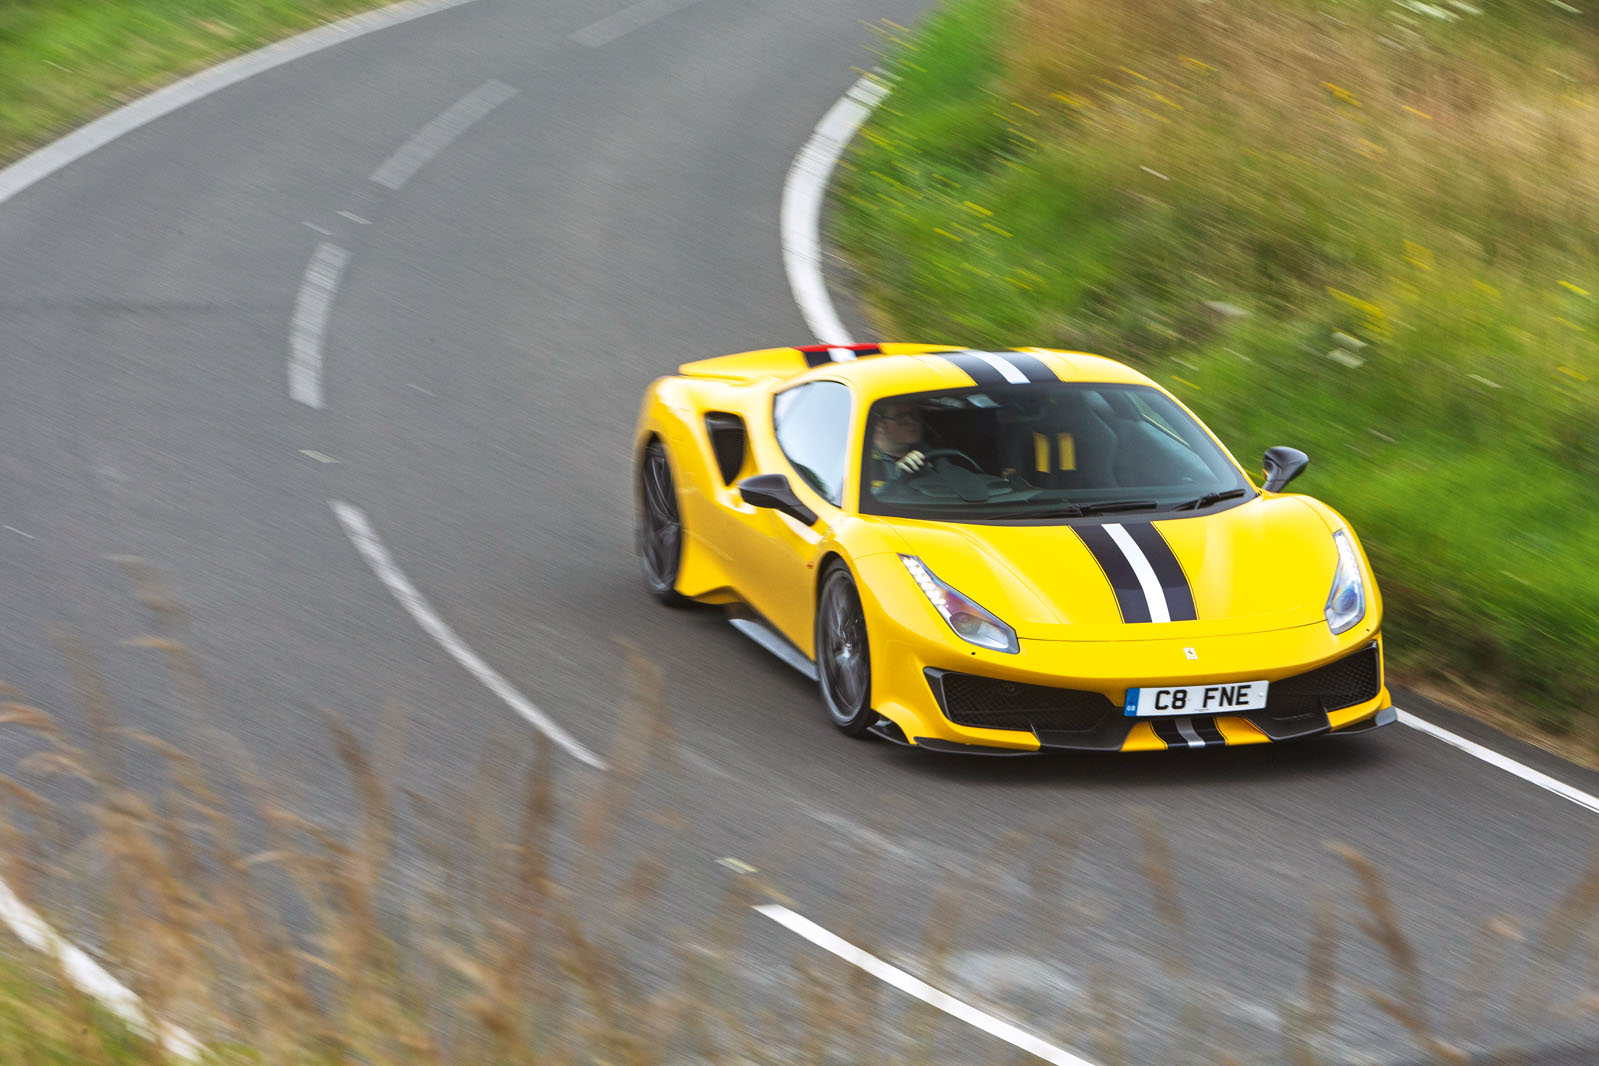 Ferrari 488 Pista 2019 road test review - on the road front